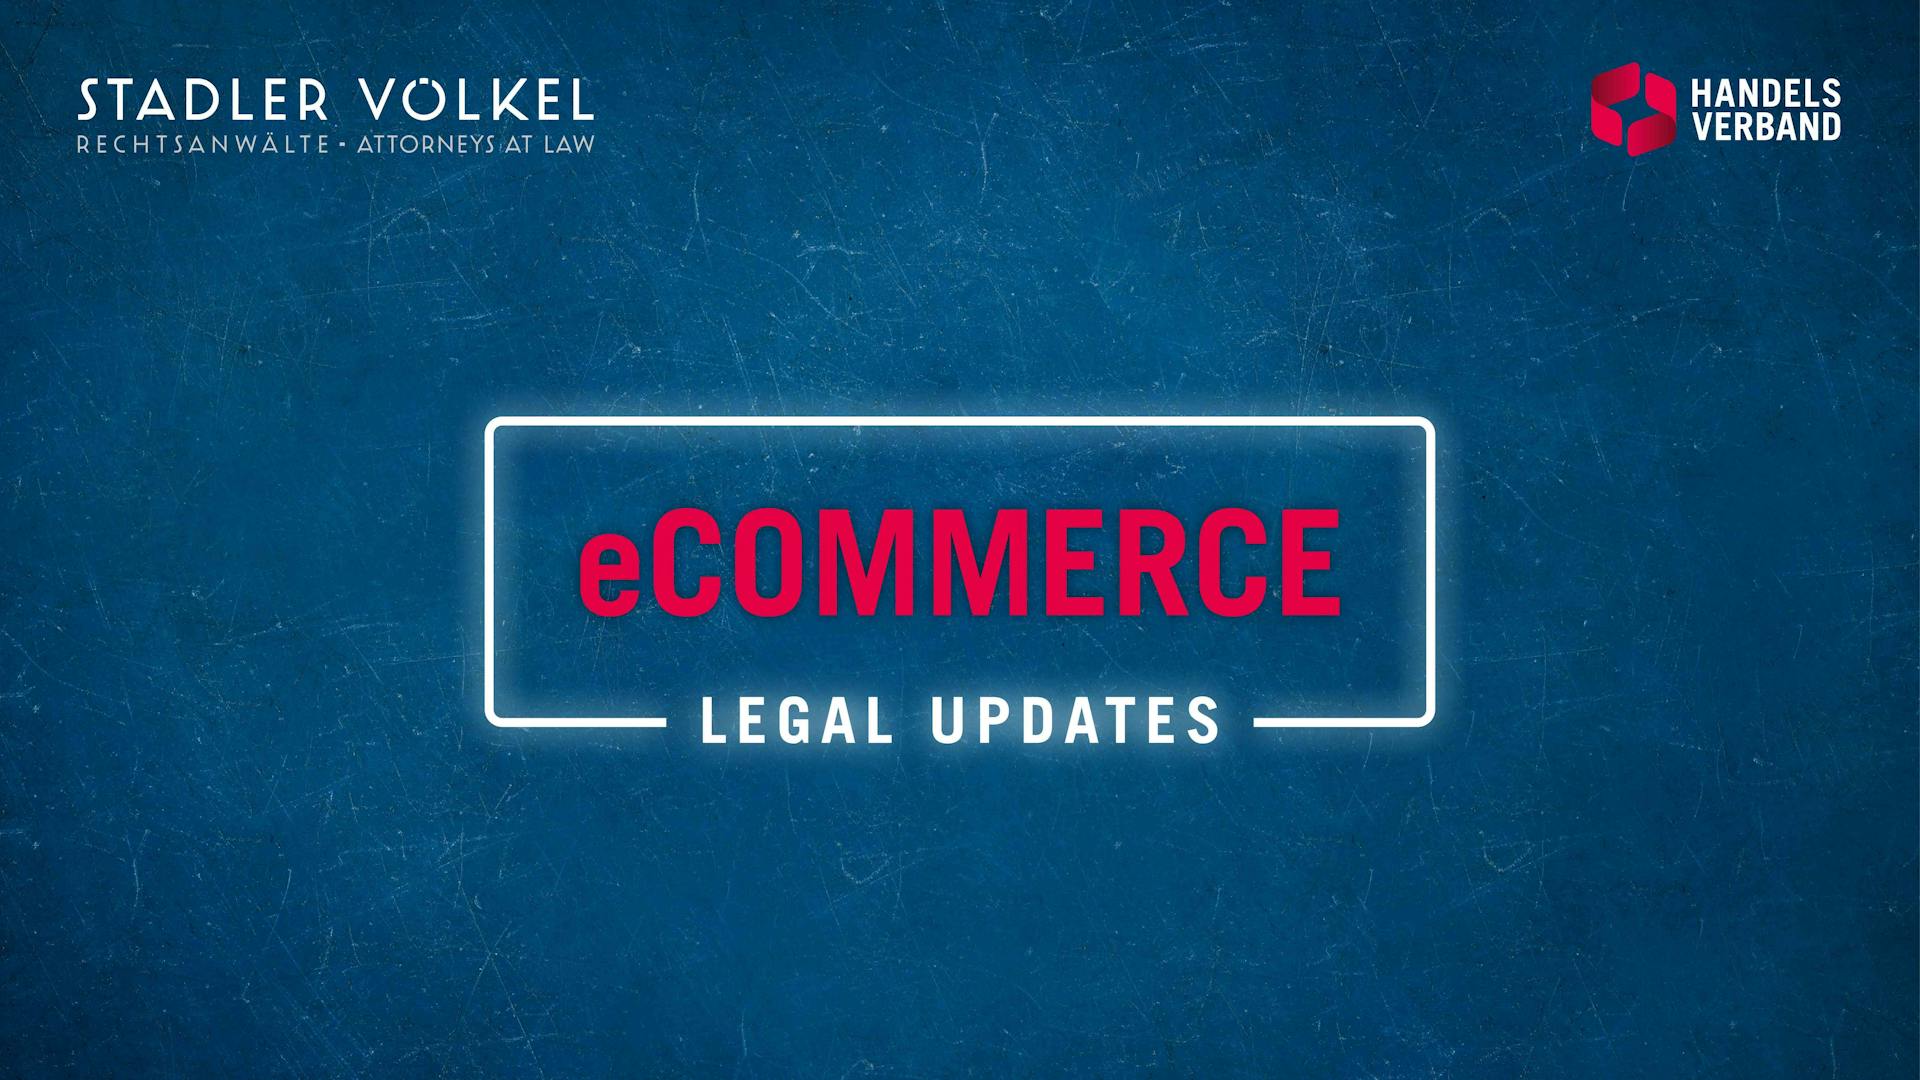 Legal Update #1: Impact of BREXIT on trademark protection